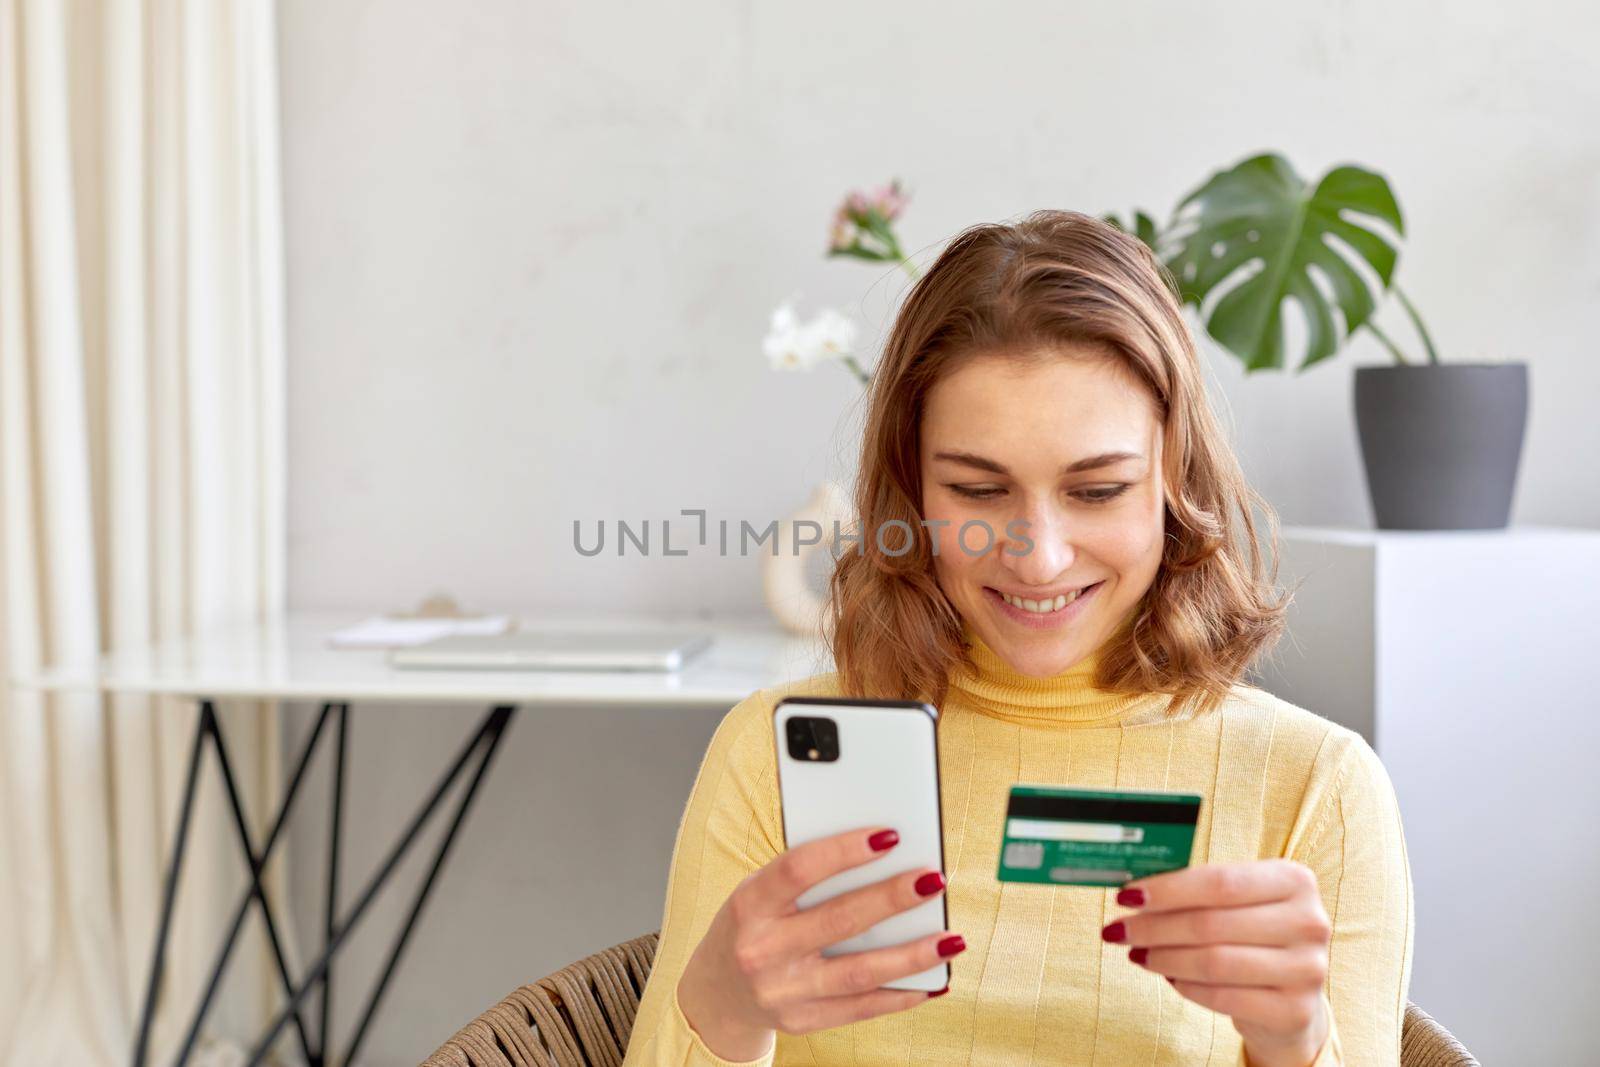 Delighted female with plastic card and smartphone making online purchase at home. Smiling woman paying by card for online purchase by phone